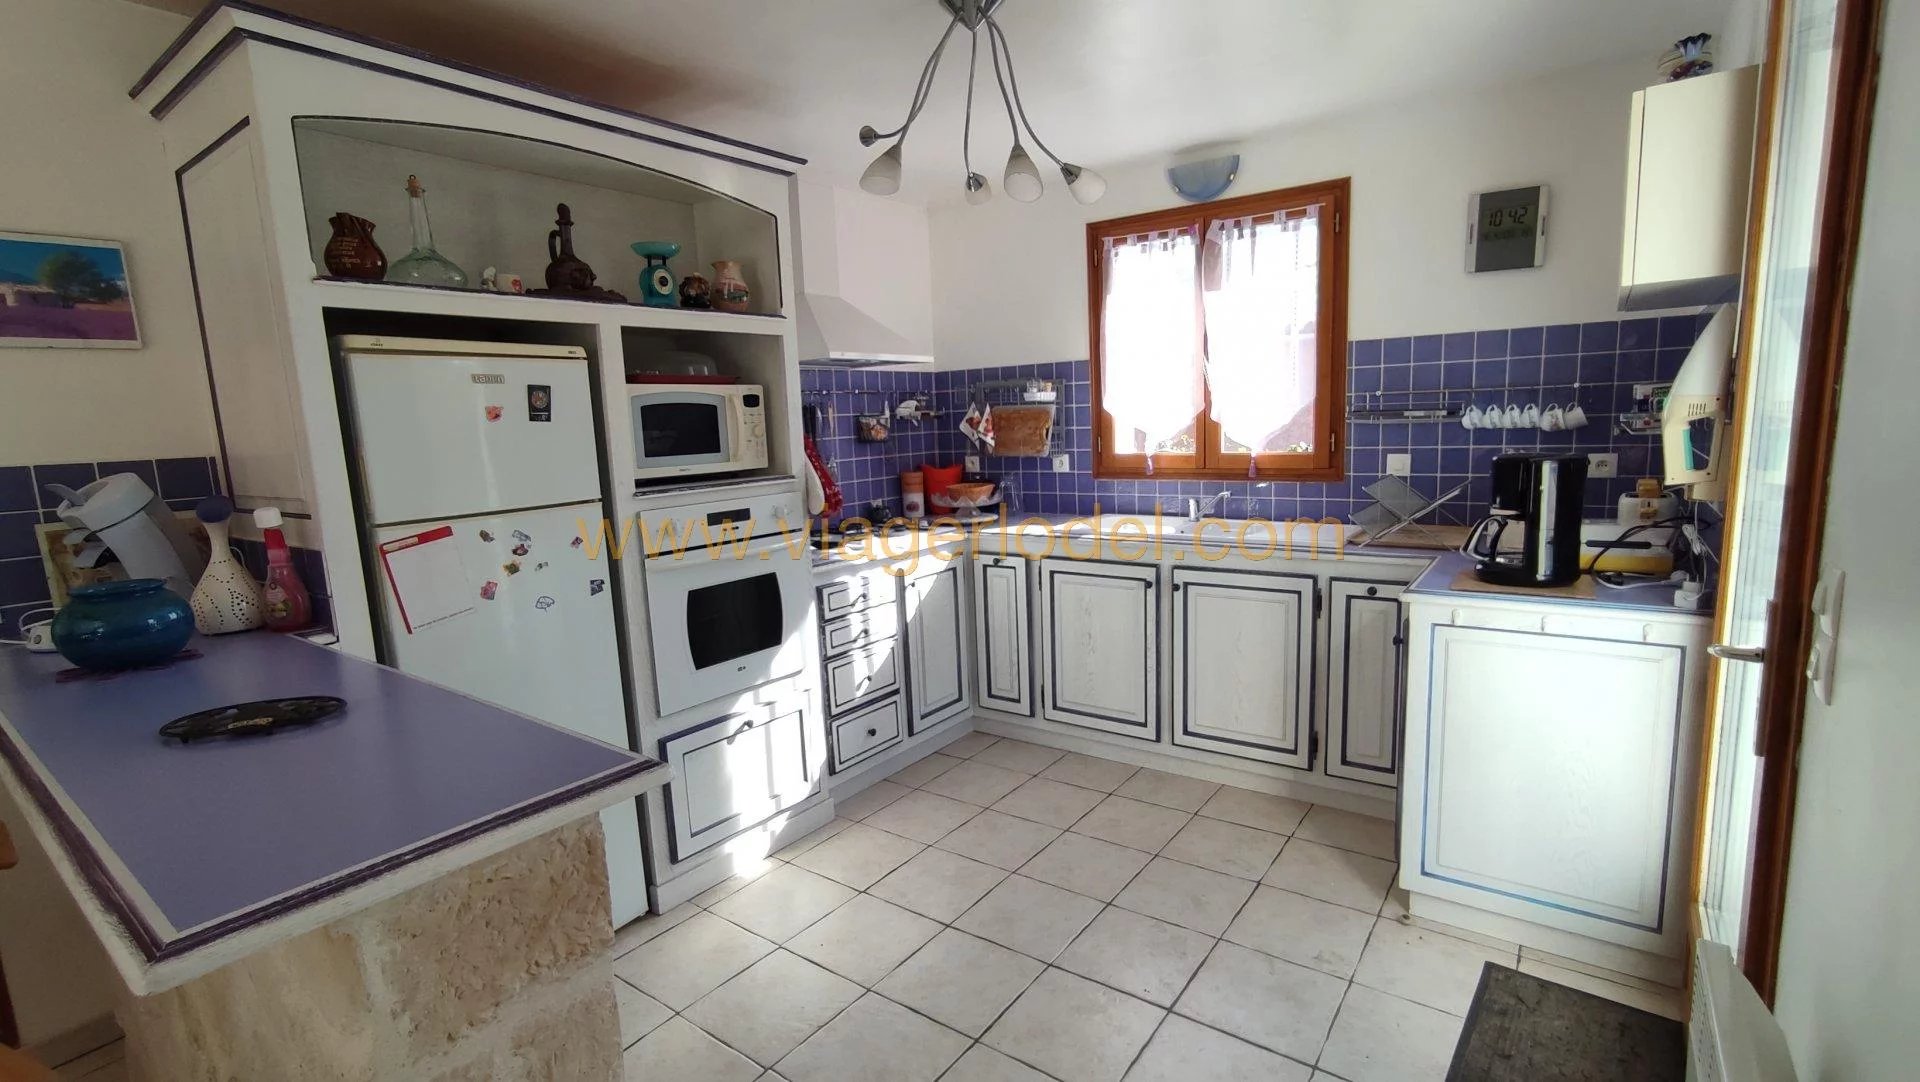 Ref.: 9057 - BARE OWNERSHIP - ROCBARON (83) - Occupied 8-room house